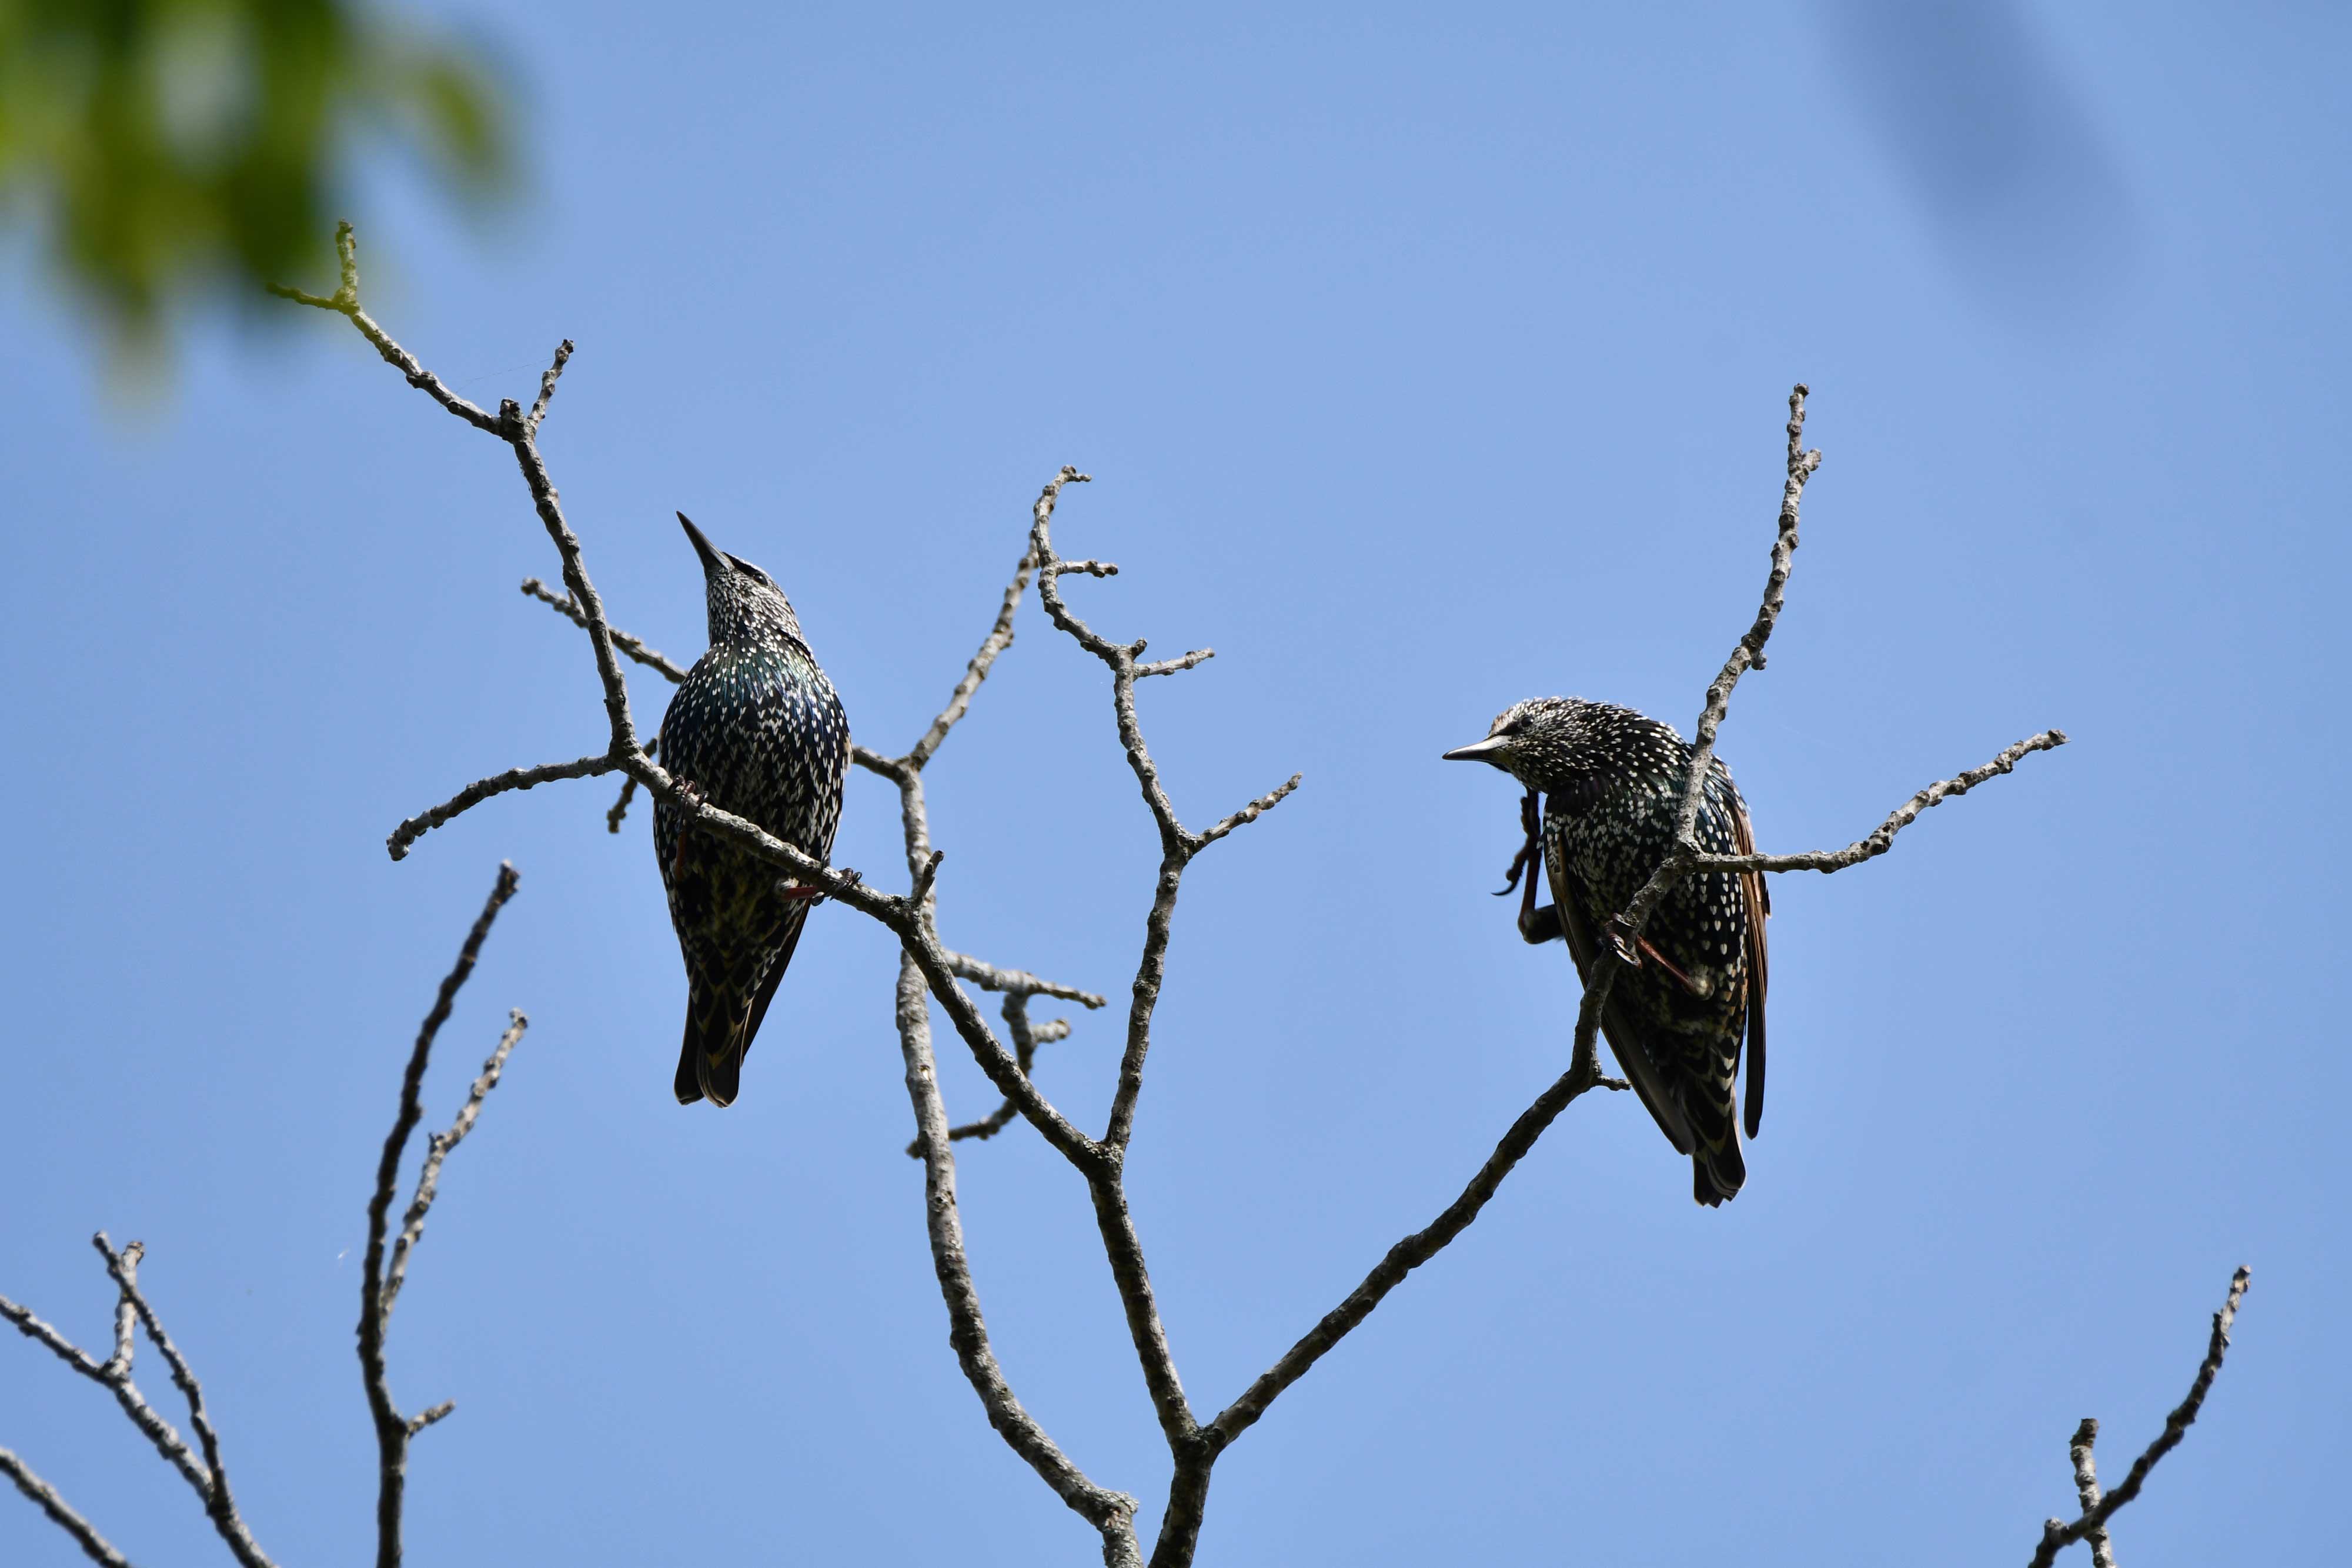 Two European starlings on branches.